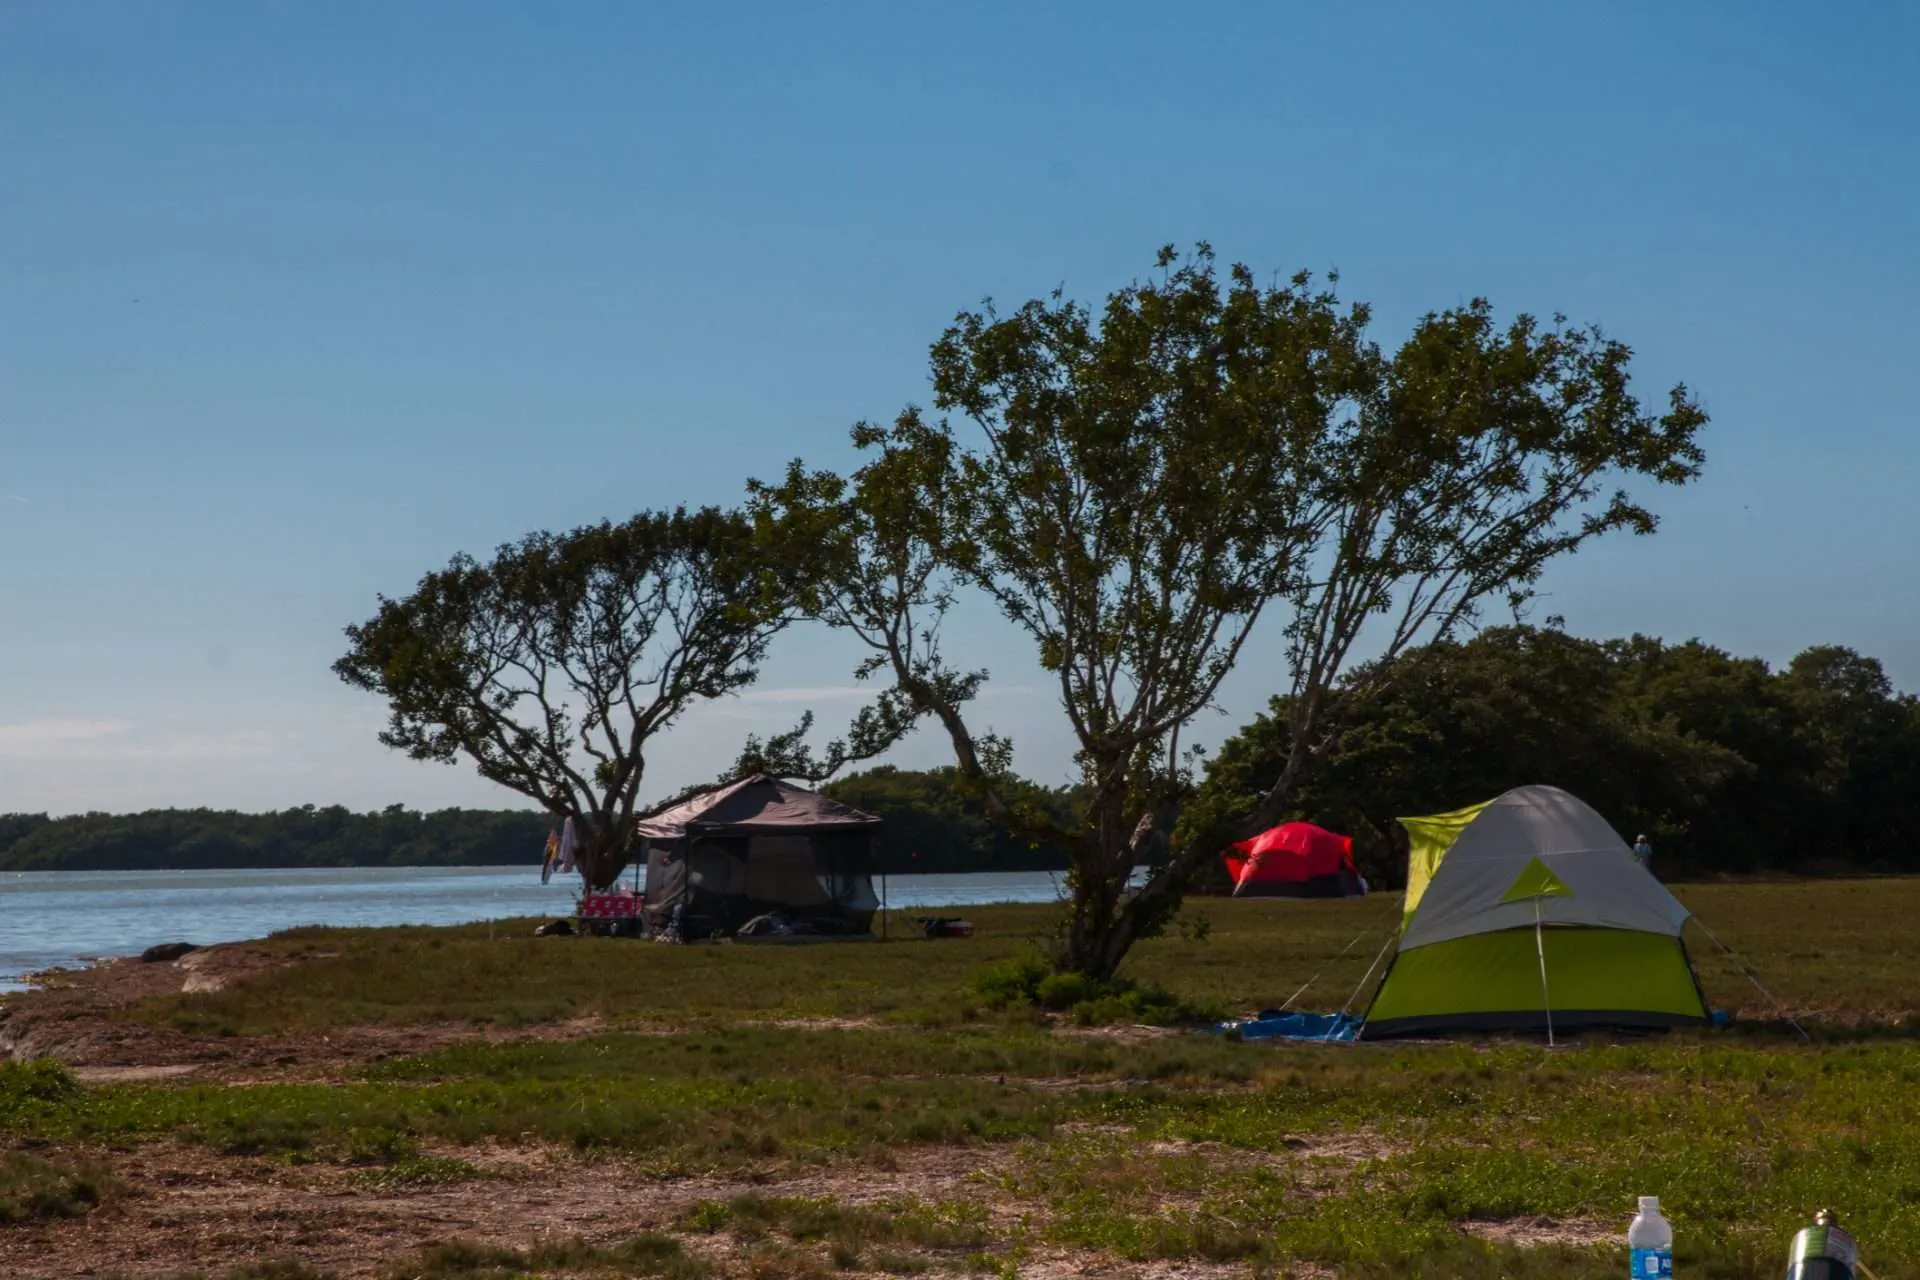 Tents set up for camping in Everglades National Park